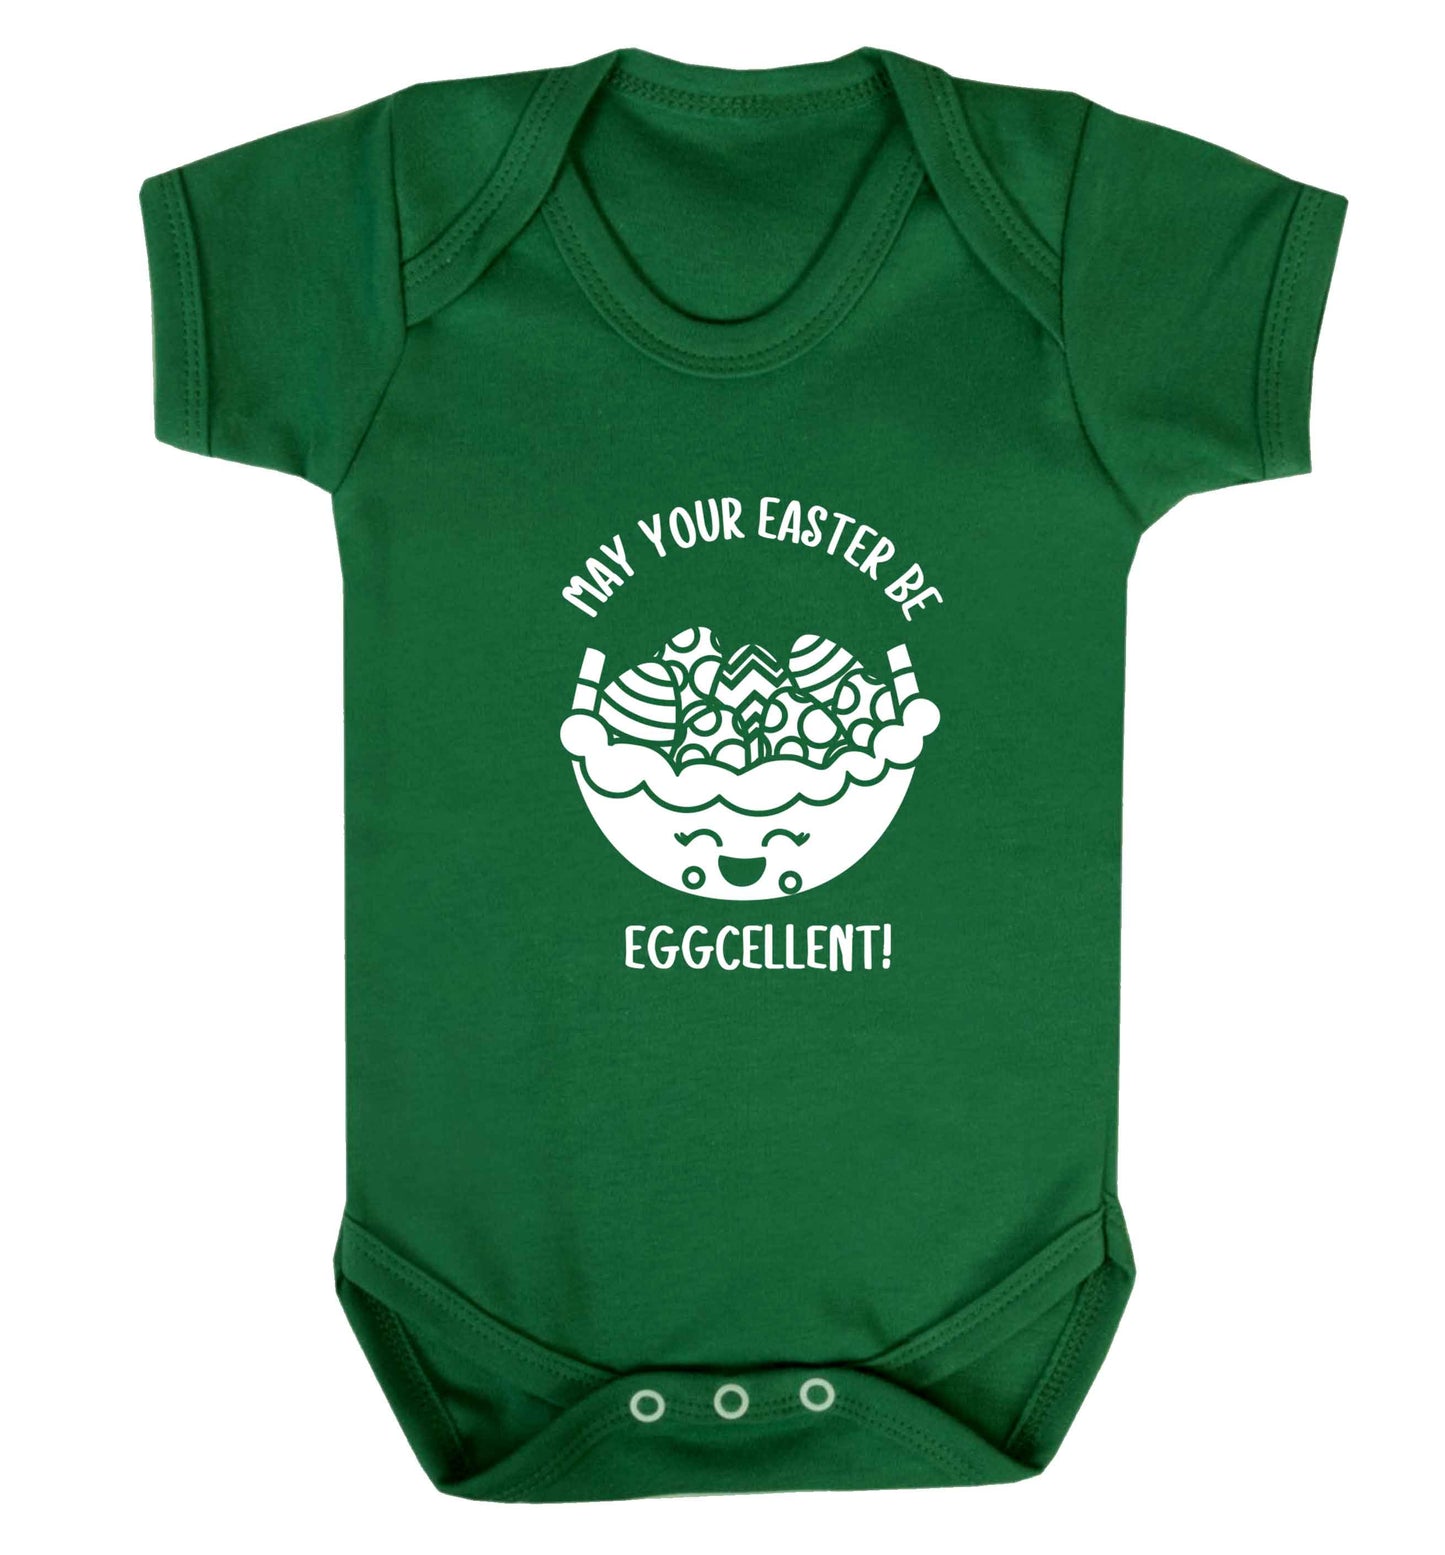 May your Easter be eggcellent baby vest green 18-24 months